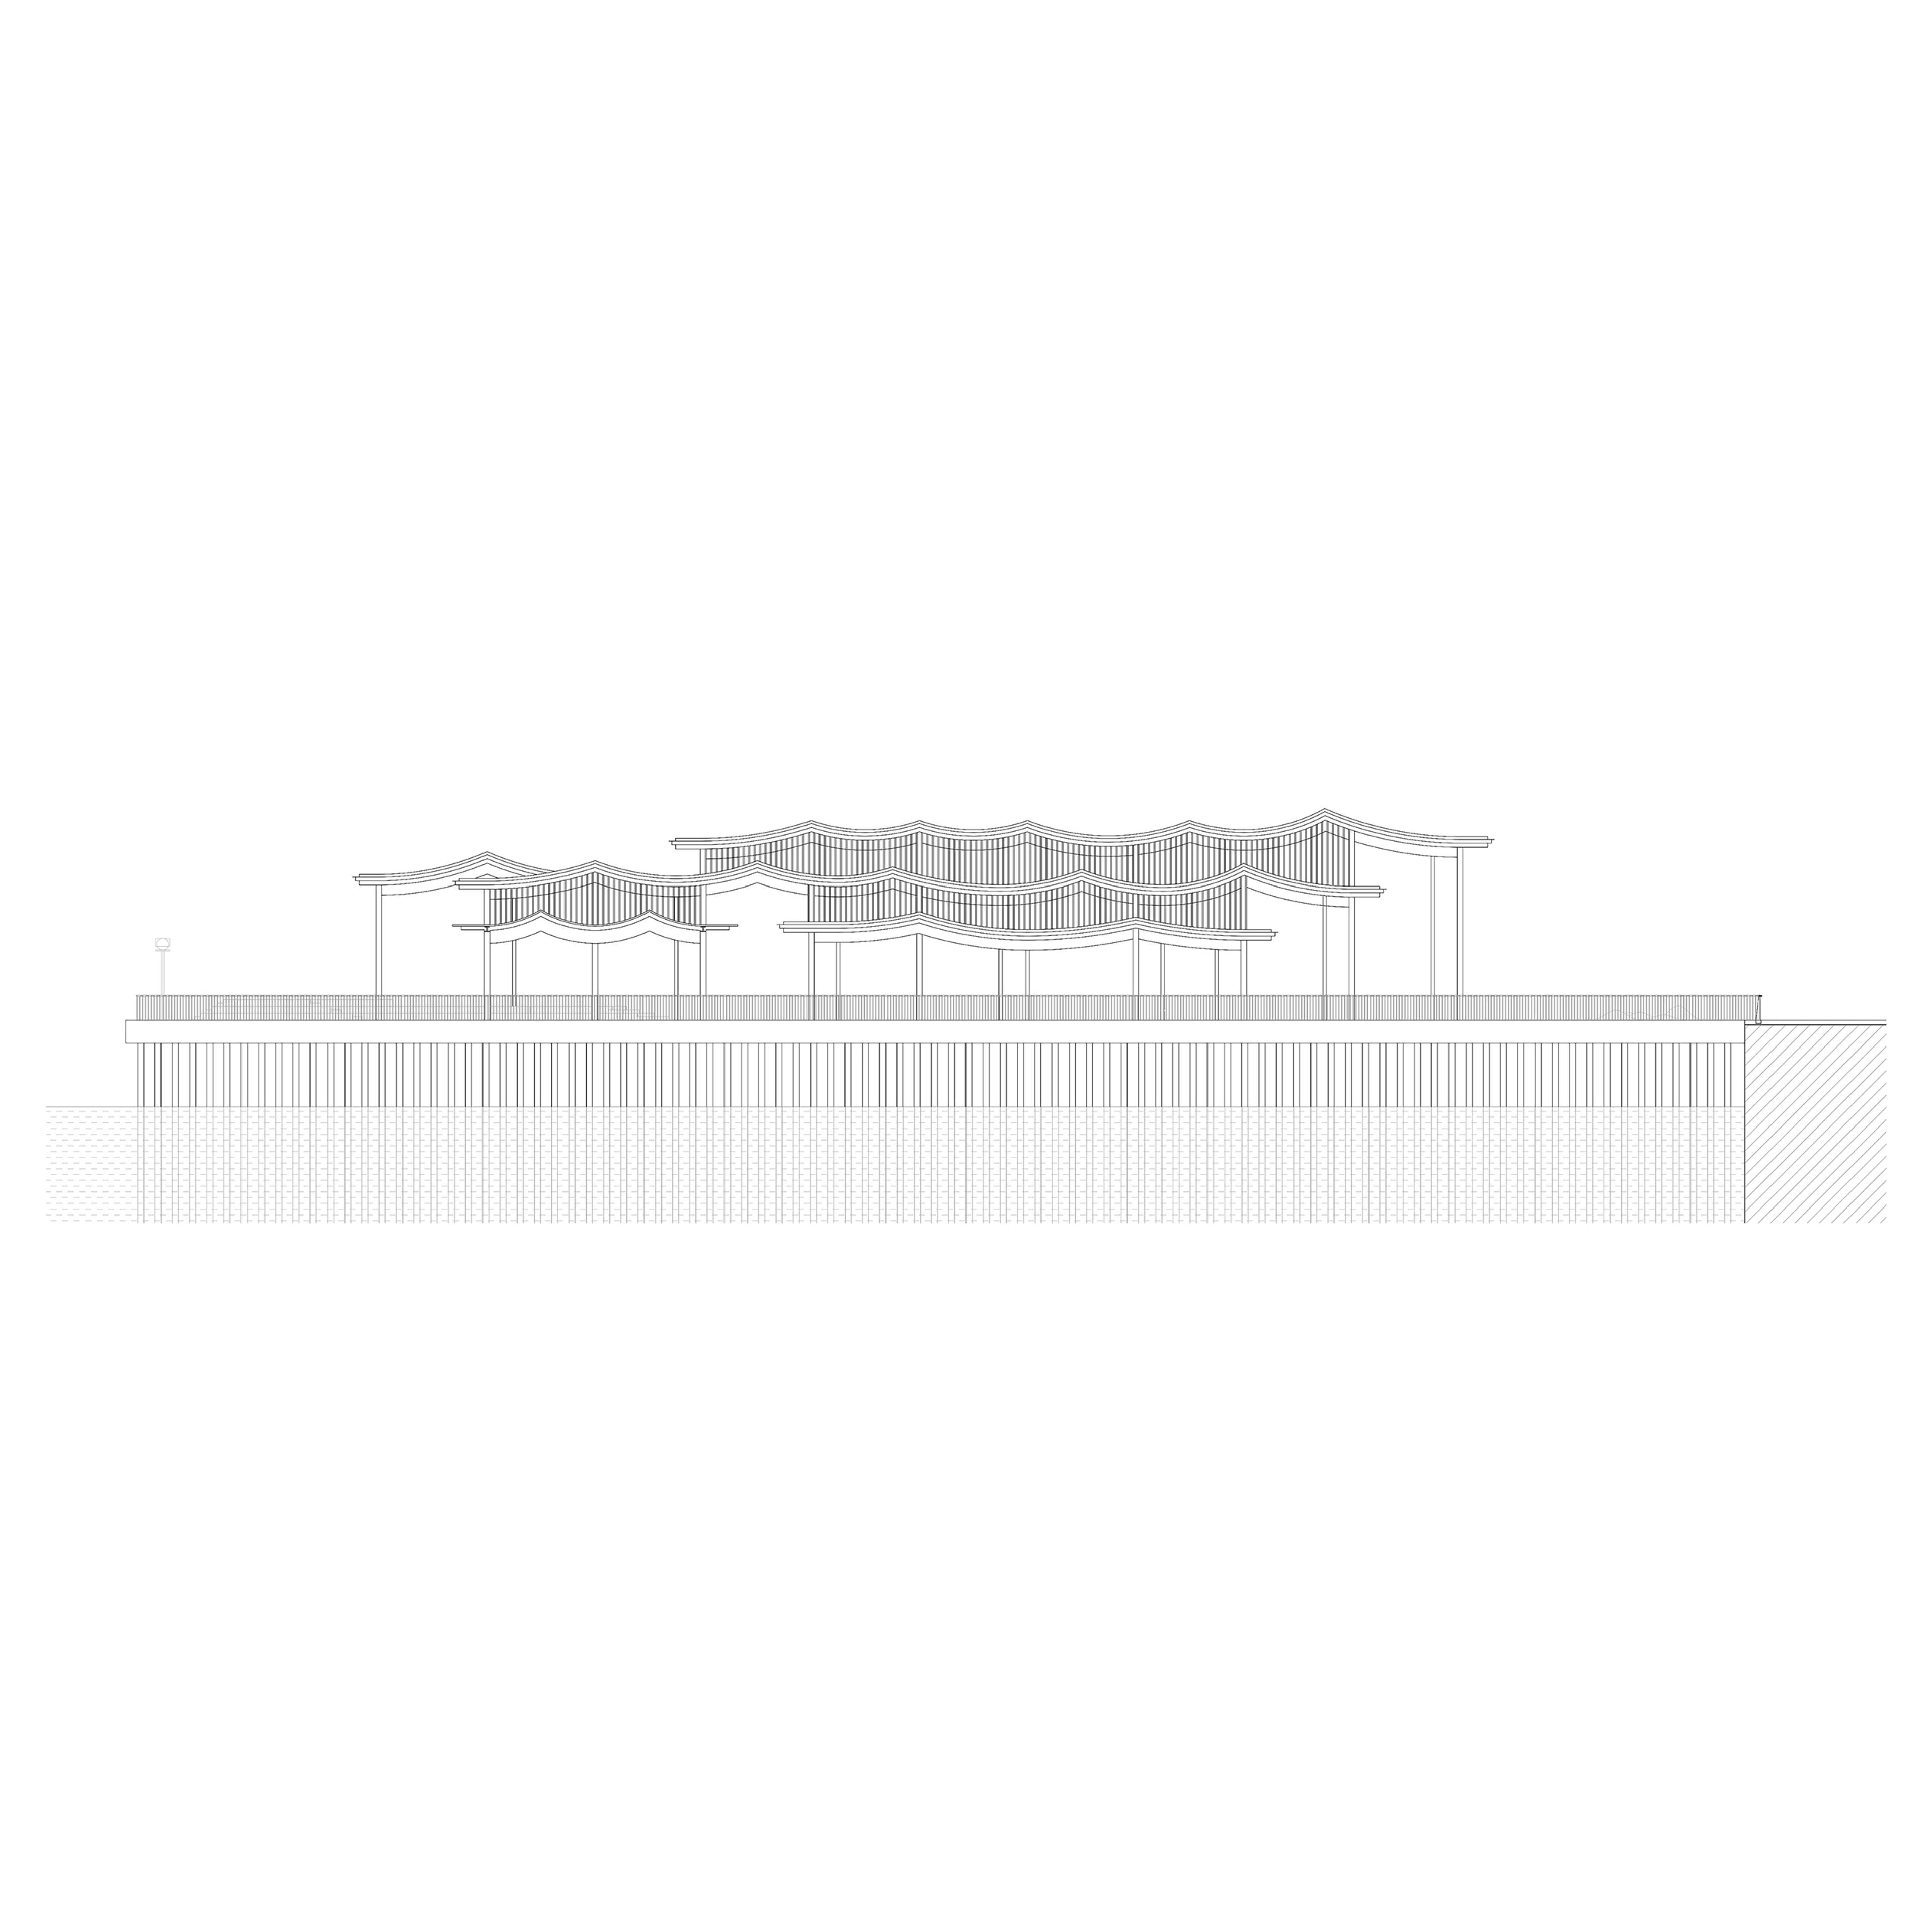 Elevation drawing of a pier re-development